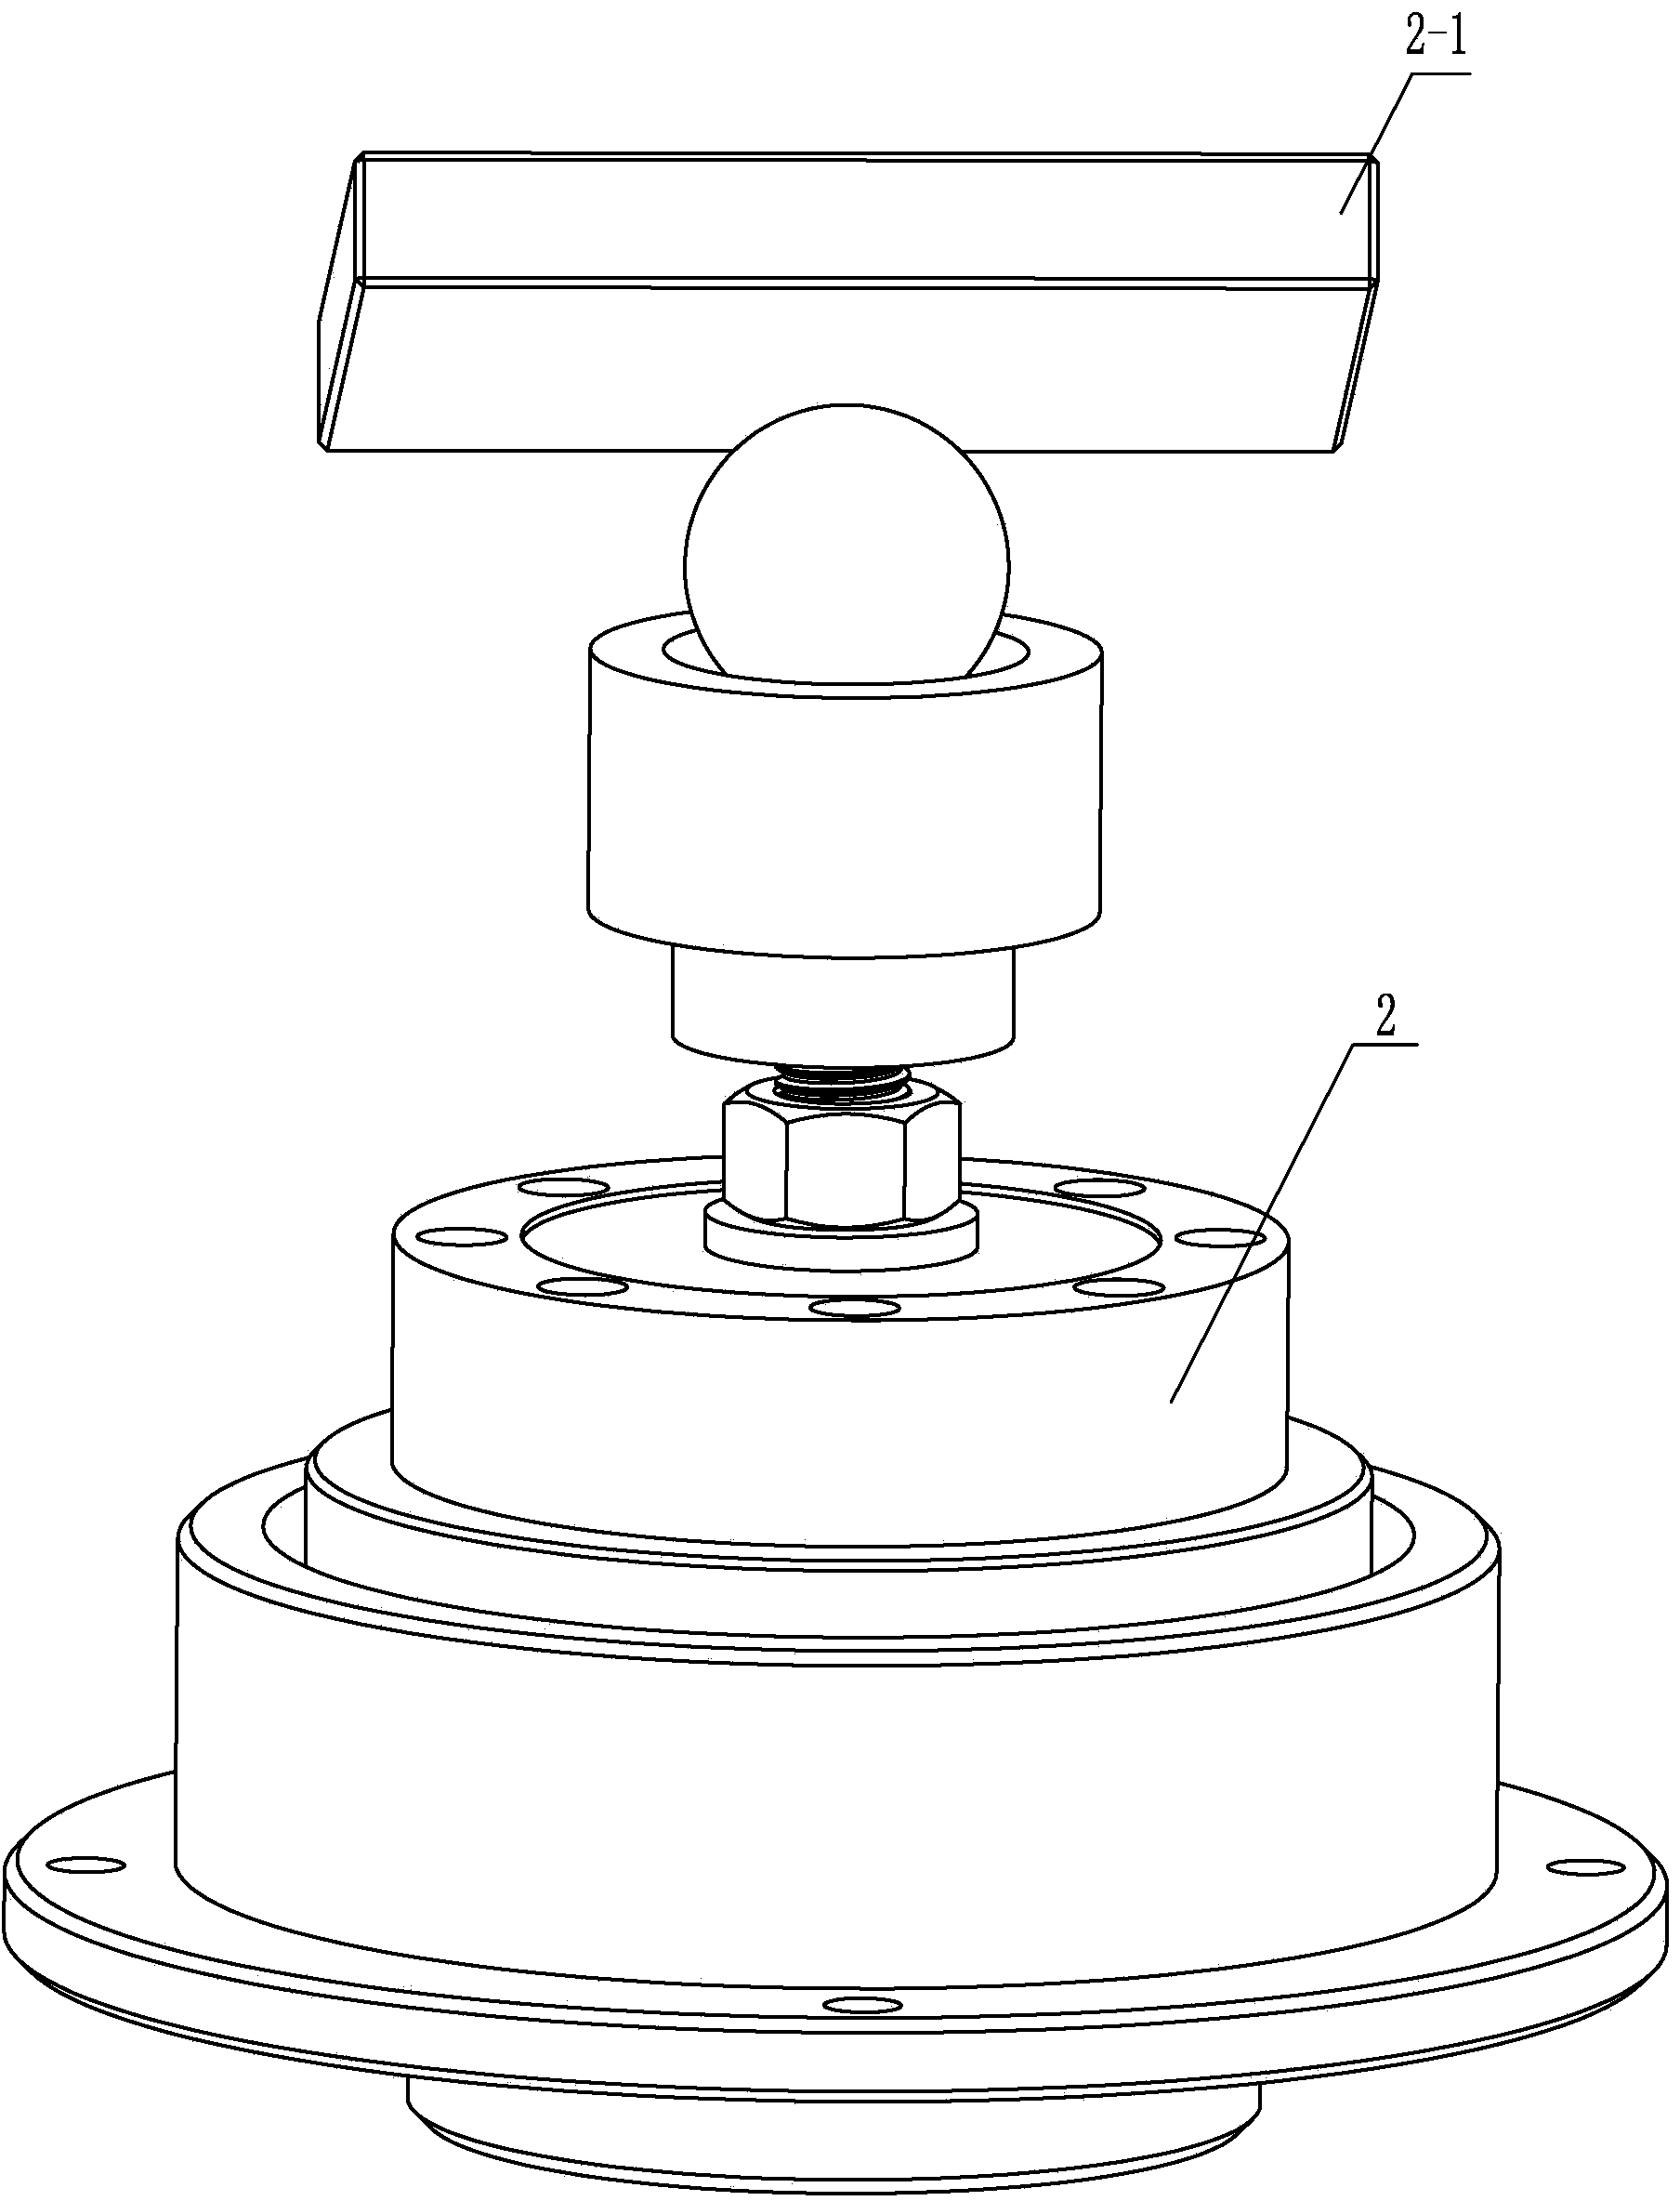 Supporting device with ball socket, column socket and plane combined in mass center measurement